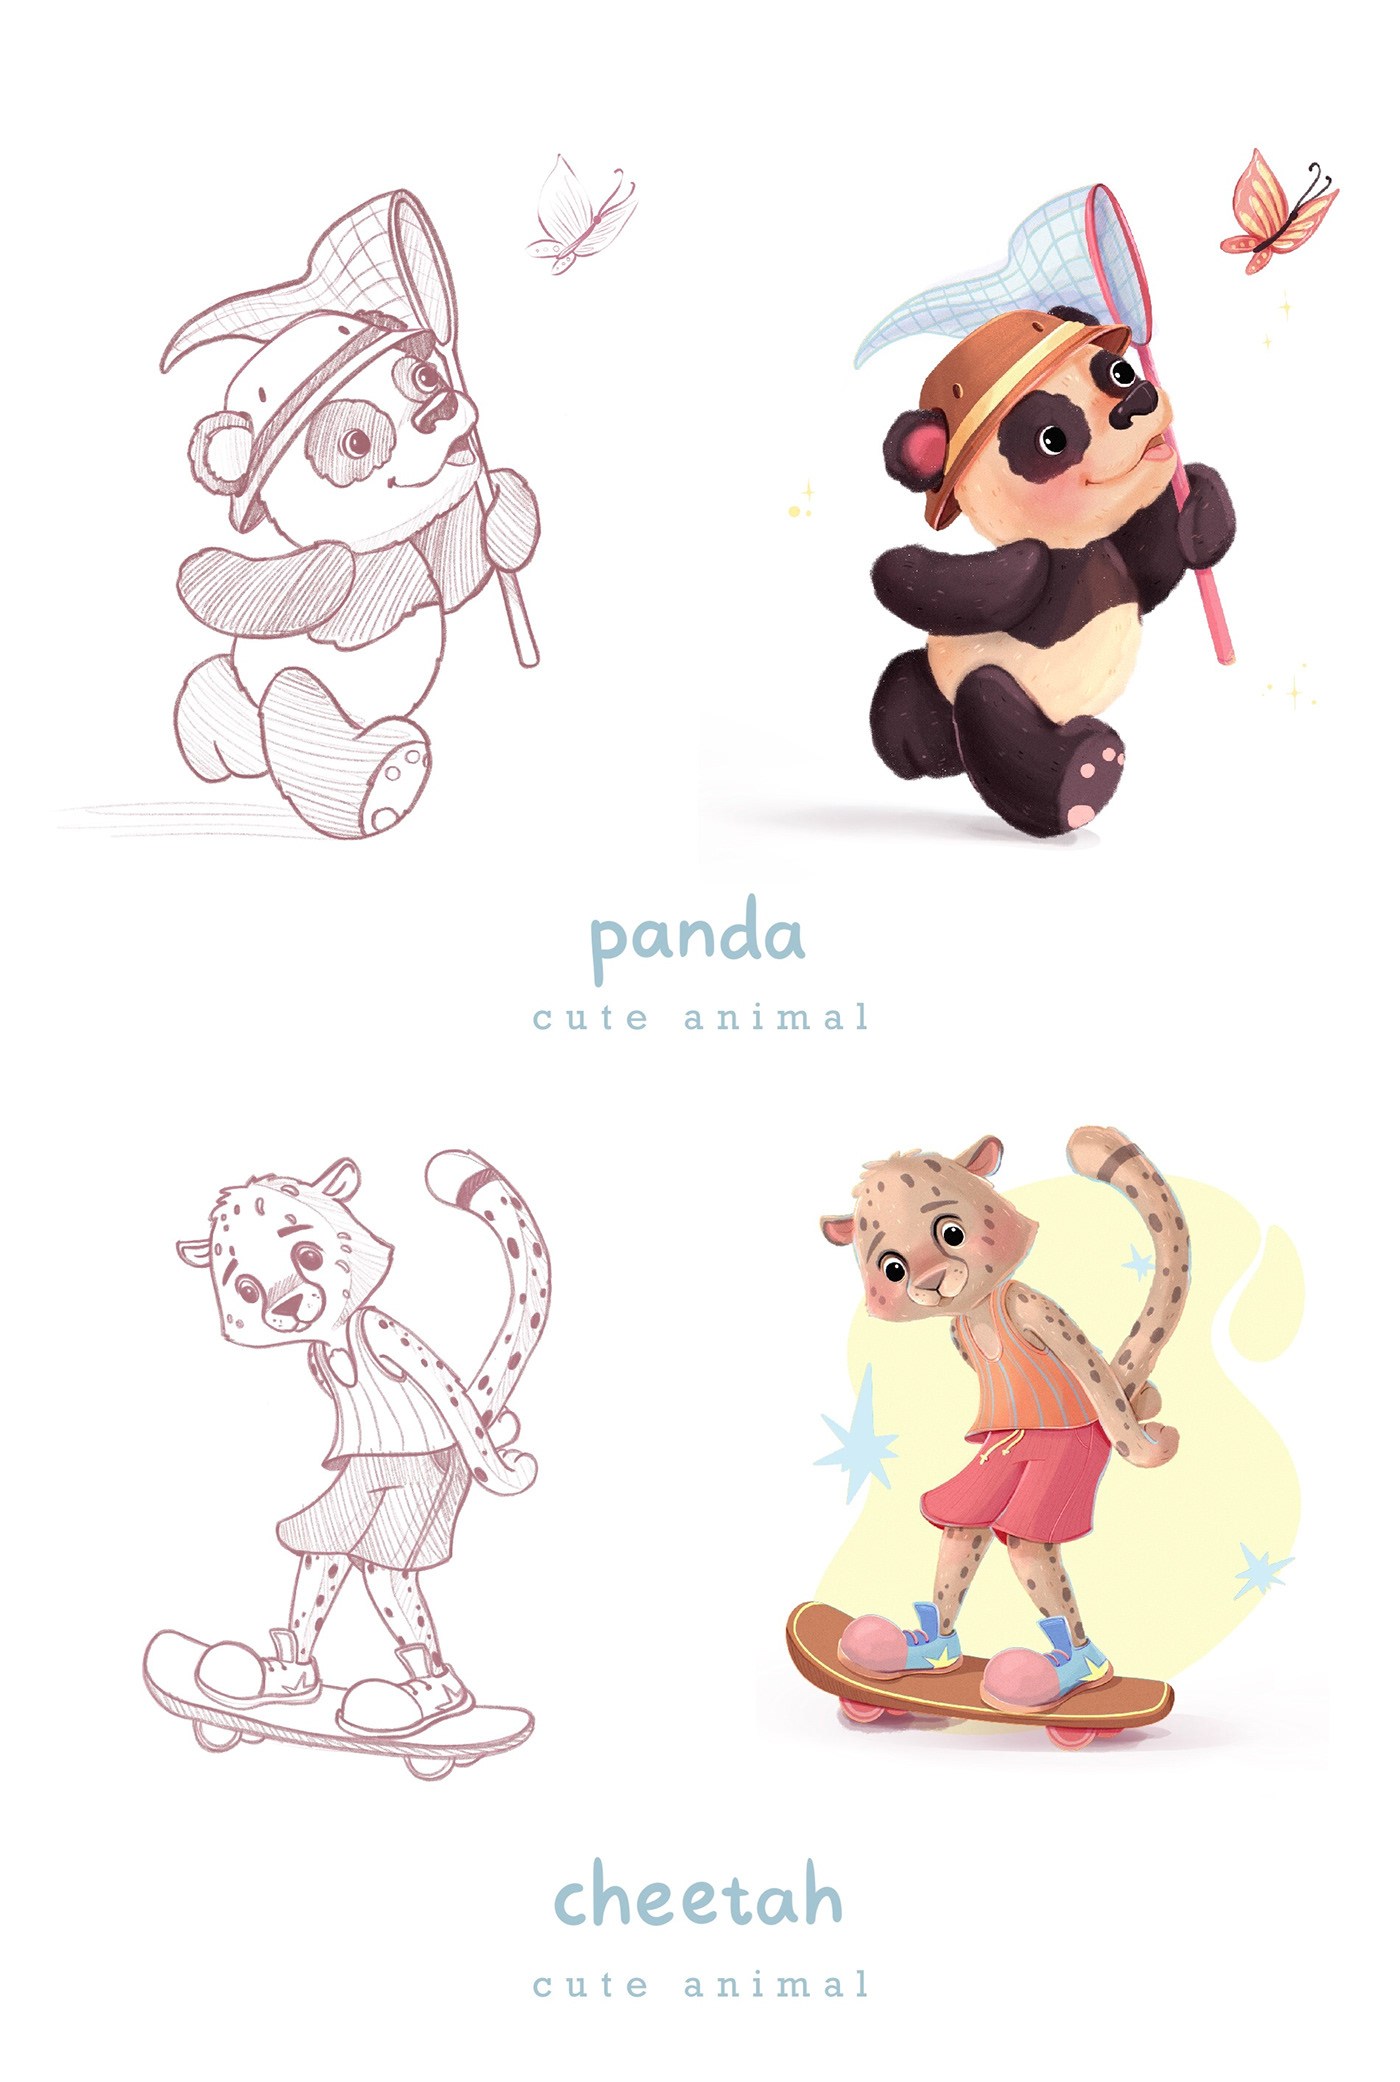 Character Character design  cartoon animals cute animals kids illustration Picture book children illustration characters kidsillustration